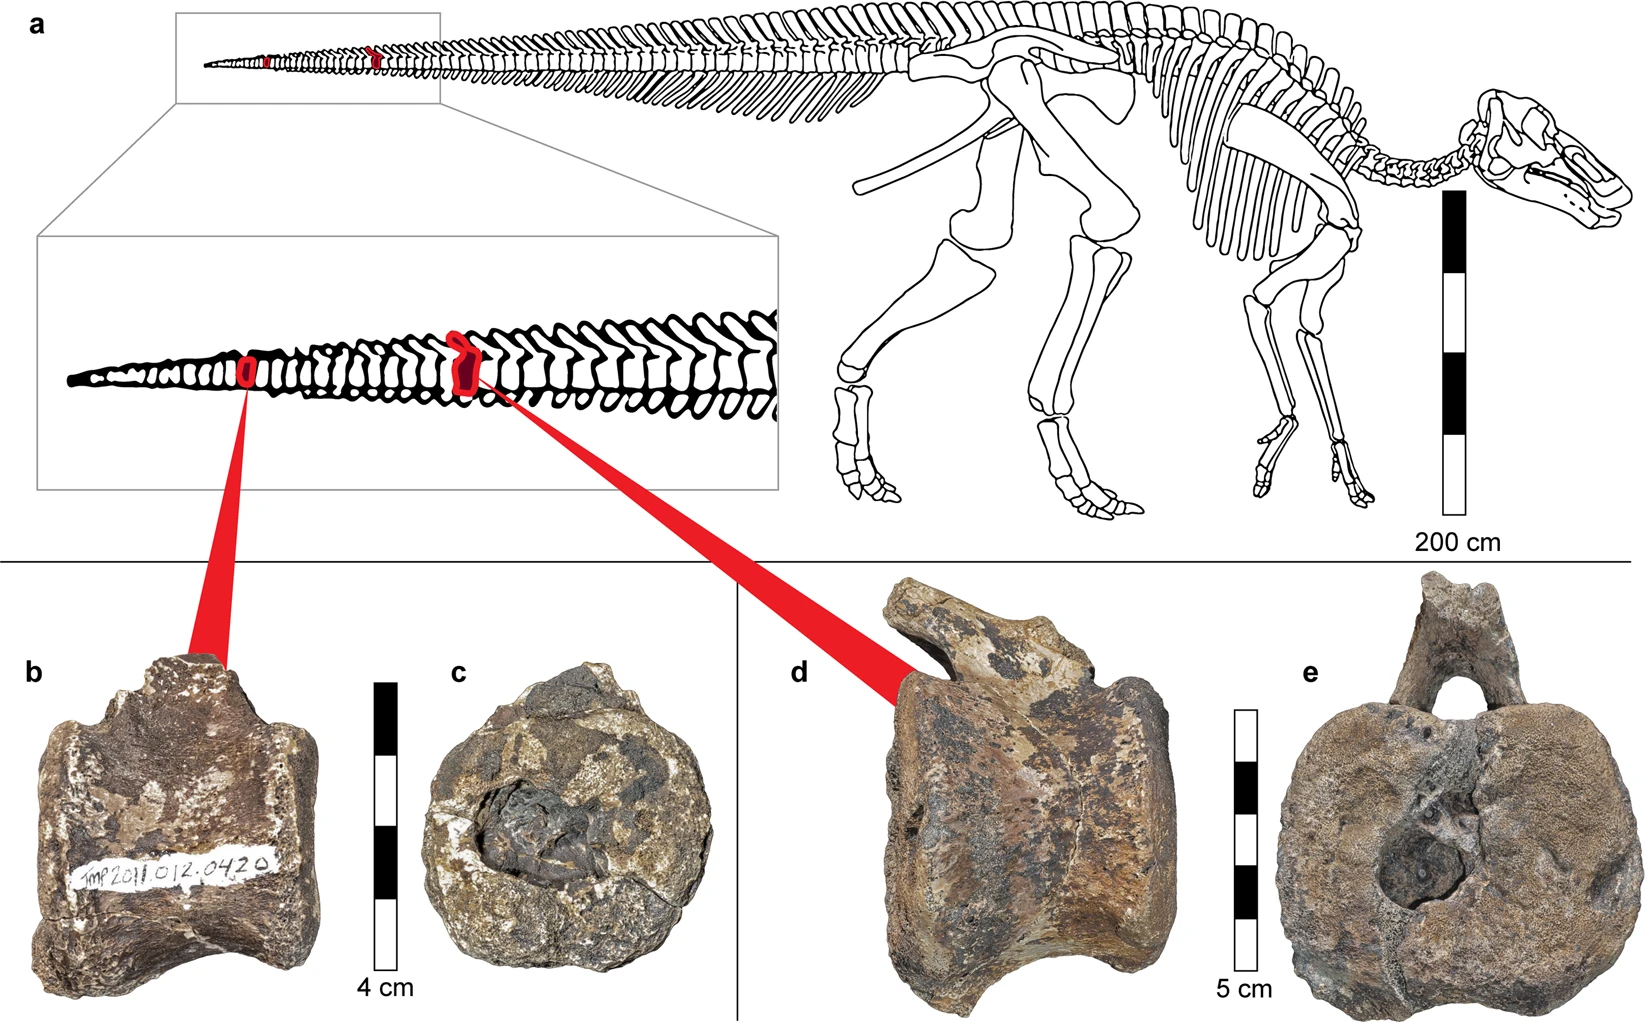 Location of the pathological vertebrae in a hadrosaur skeleton (a). Skeleton reconstruction from Campione and Evans. Both small (b,c) and large pathological vertebrae (d,e) are from the distal part of the hadrosaur tail. Note the large oval-shaped cavities that open to the caudal discal surface